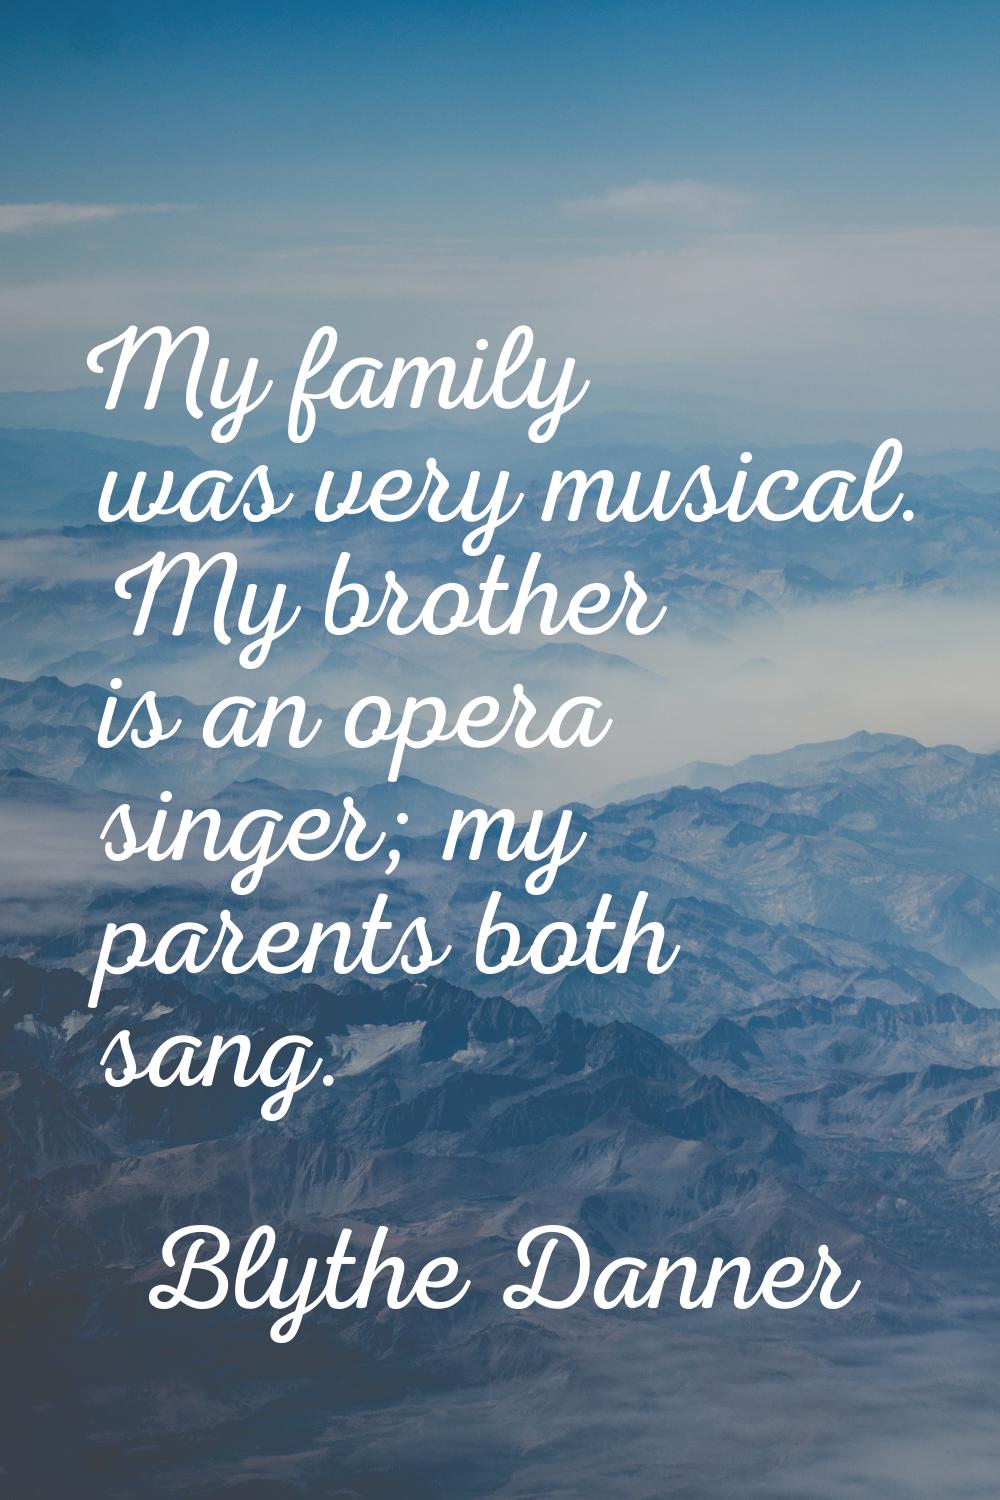 My family was very musical. My brother is an opera singer; my parents both sang.